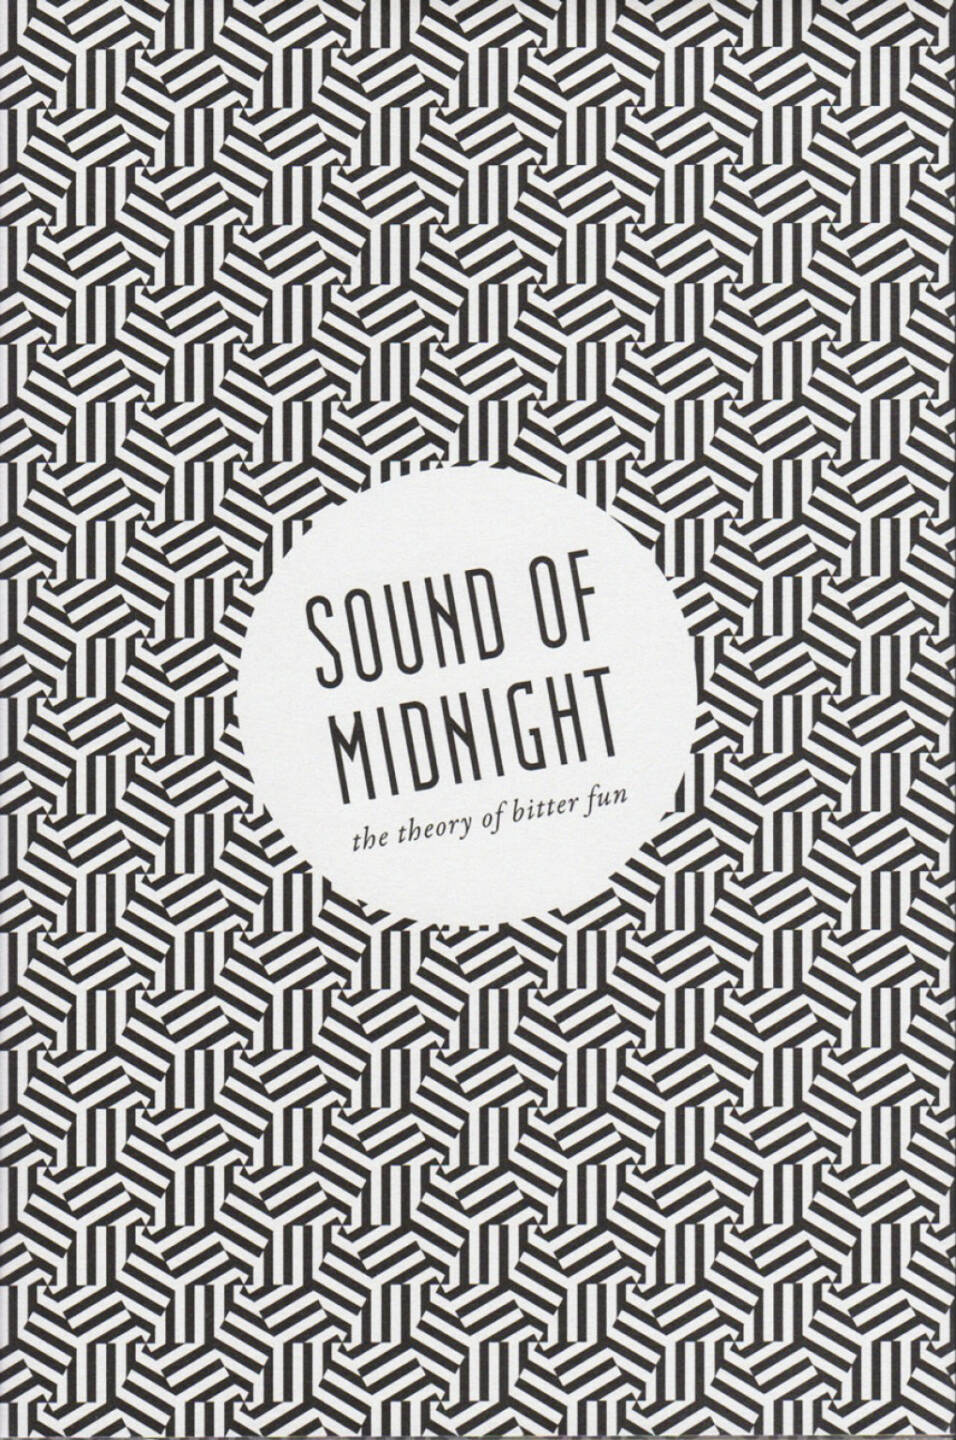 Clément Paradis - Sound of Midnight - the theory of bitter fun, Timeshow Press 2014, Cover - http://josefchladek.com/book/clement_paradis_-_sound_of_midnight_-_the_theory_of_bitter_fun